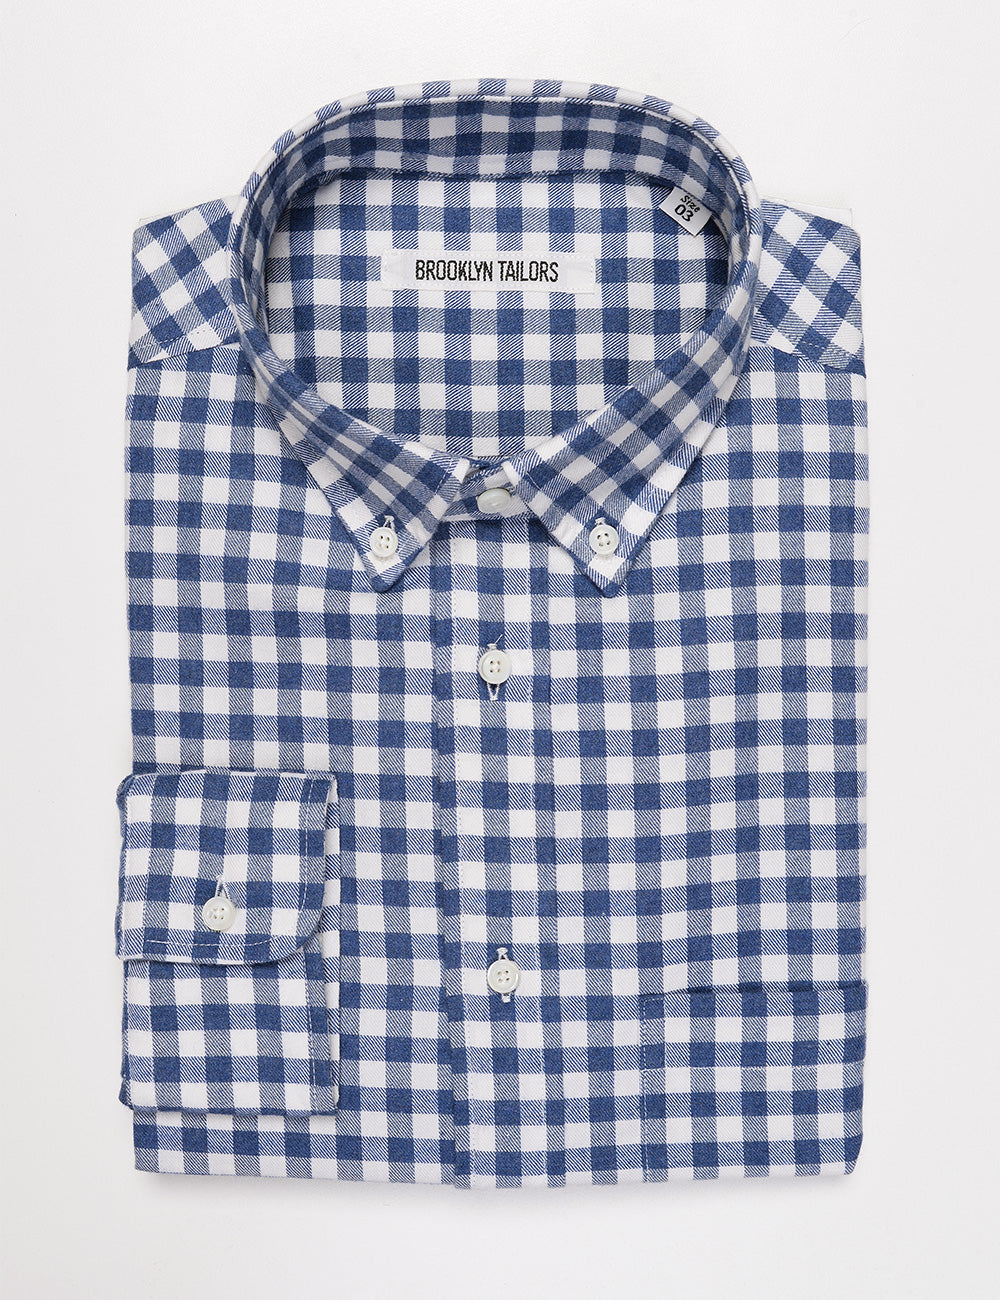 Folded flat shot of Brooklyn Tailors BKT10 Slim Casual Shirt in Brushed Cotton Gingham - Blue and White